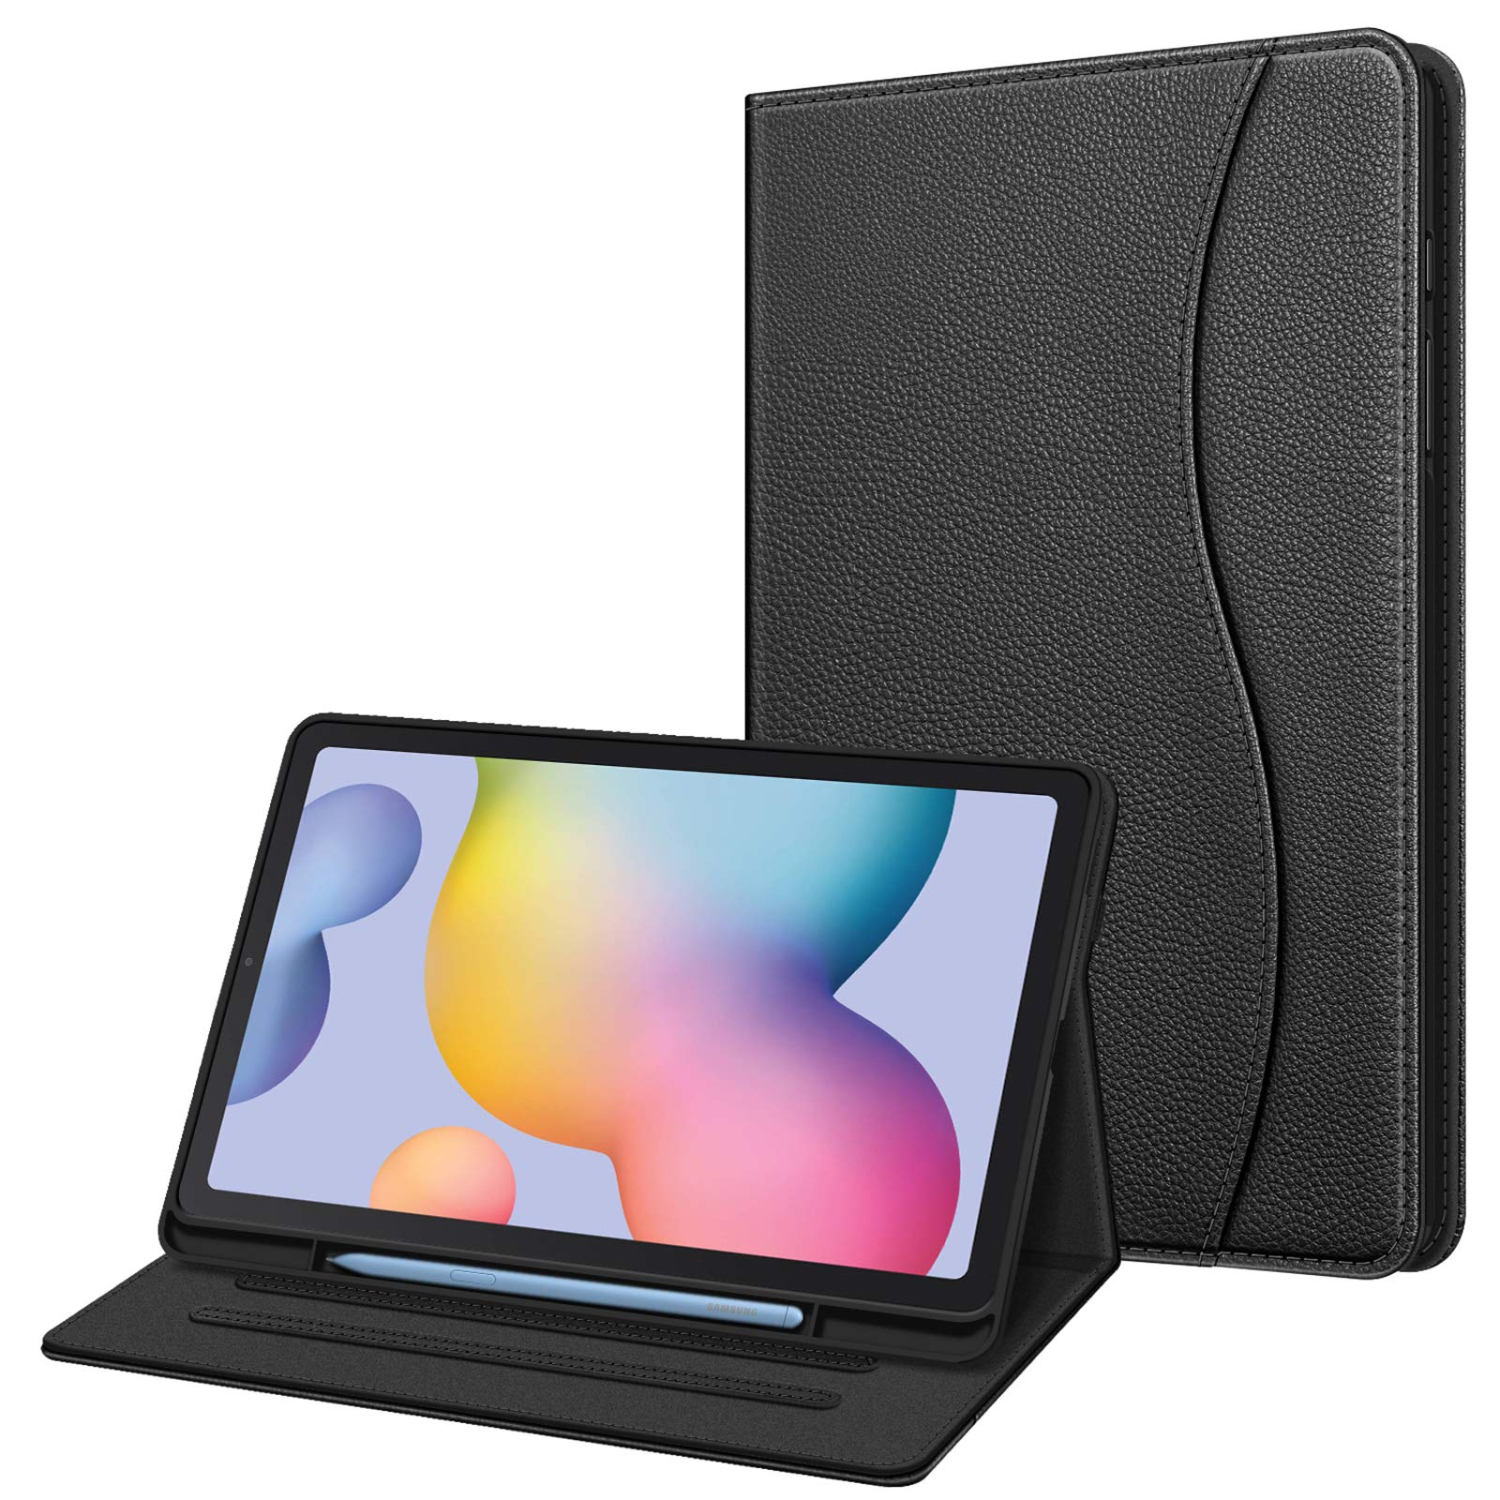 Fintie Case for Samsung Galaxy Tab S6 Lite 10.4 inch 2022/2020 Model (SM-P610/P613/P615/P619) with S Pen Holder, Multi-Angle